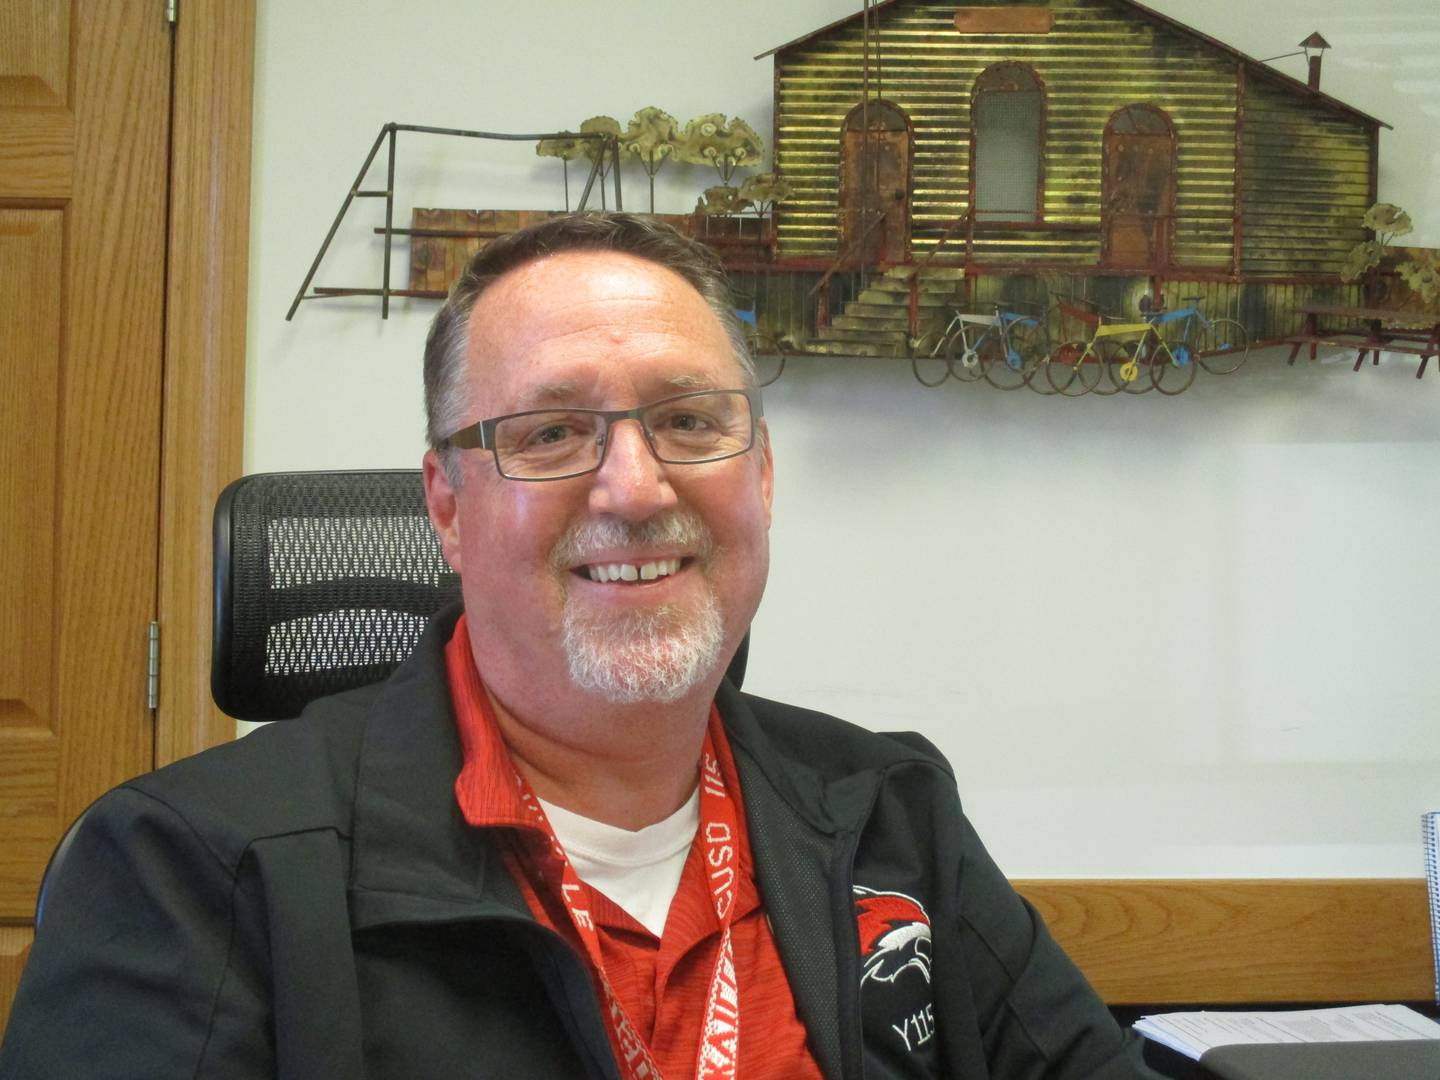 Kreg Wesley is the director of finance and operations for Yorkville School District Y115.